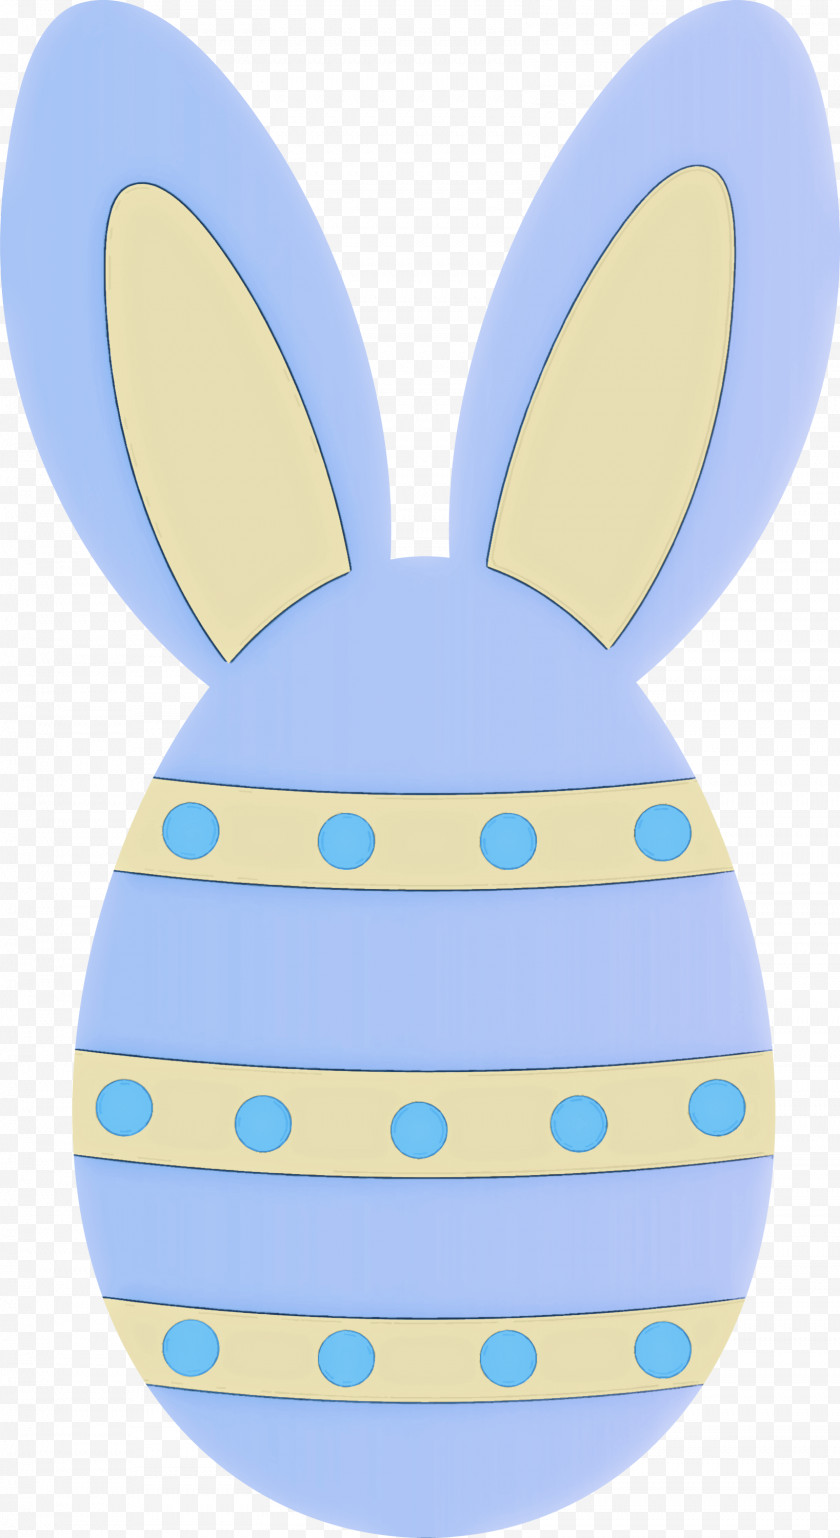 Easter Egg With Bunny Ears Free PNG